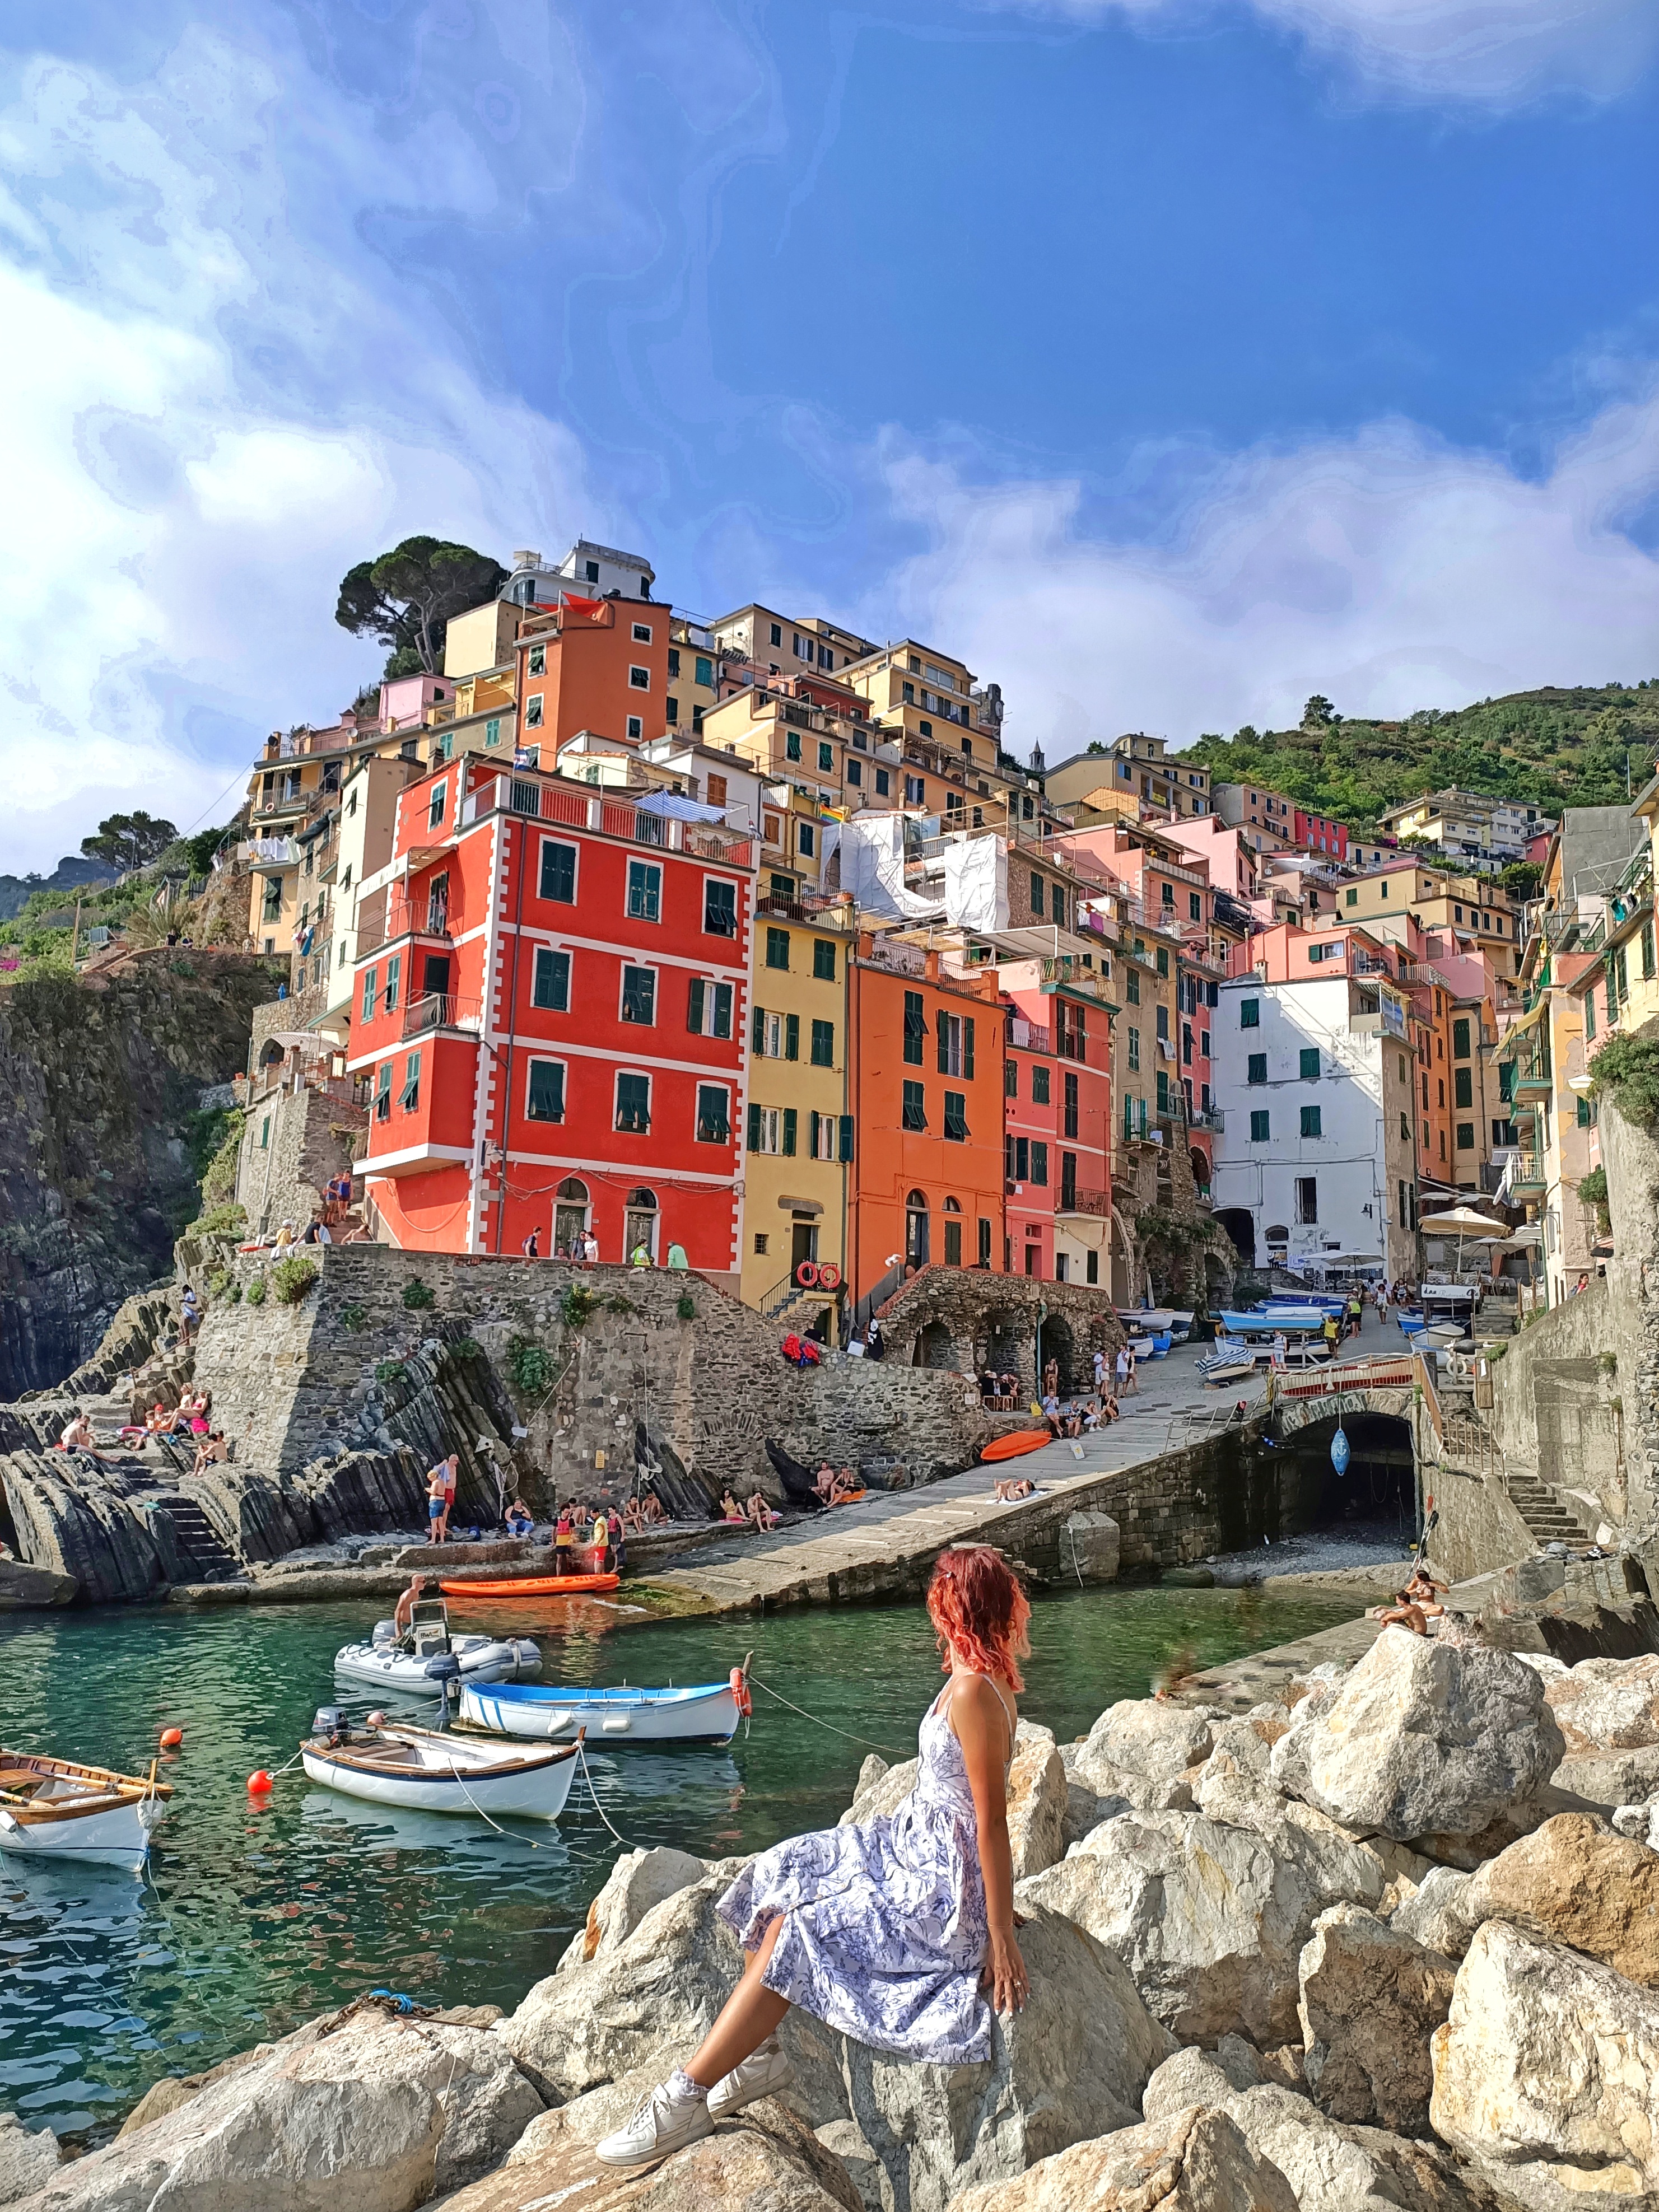 Sunset spot in Riomaggiore, Cinque Terre. I am sitting on the rocks near the water, we can see small fishermen's boats in the background and the typical colourful houses of Riomaggiore.